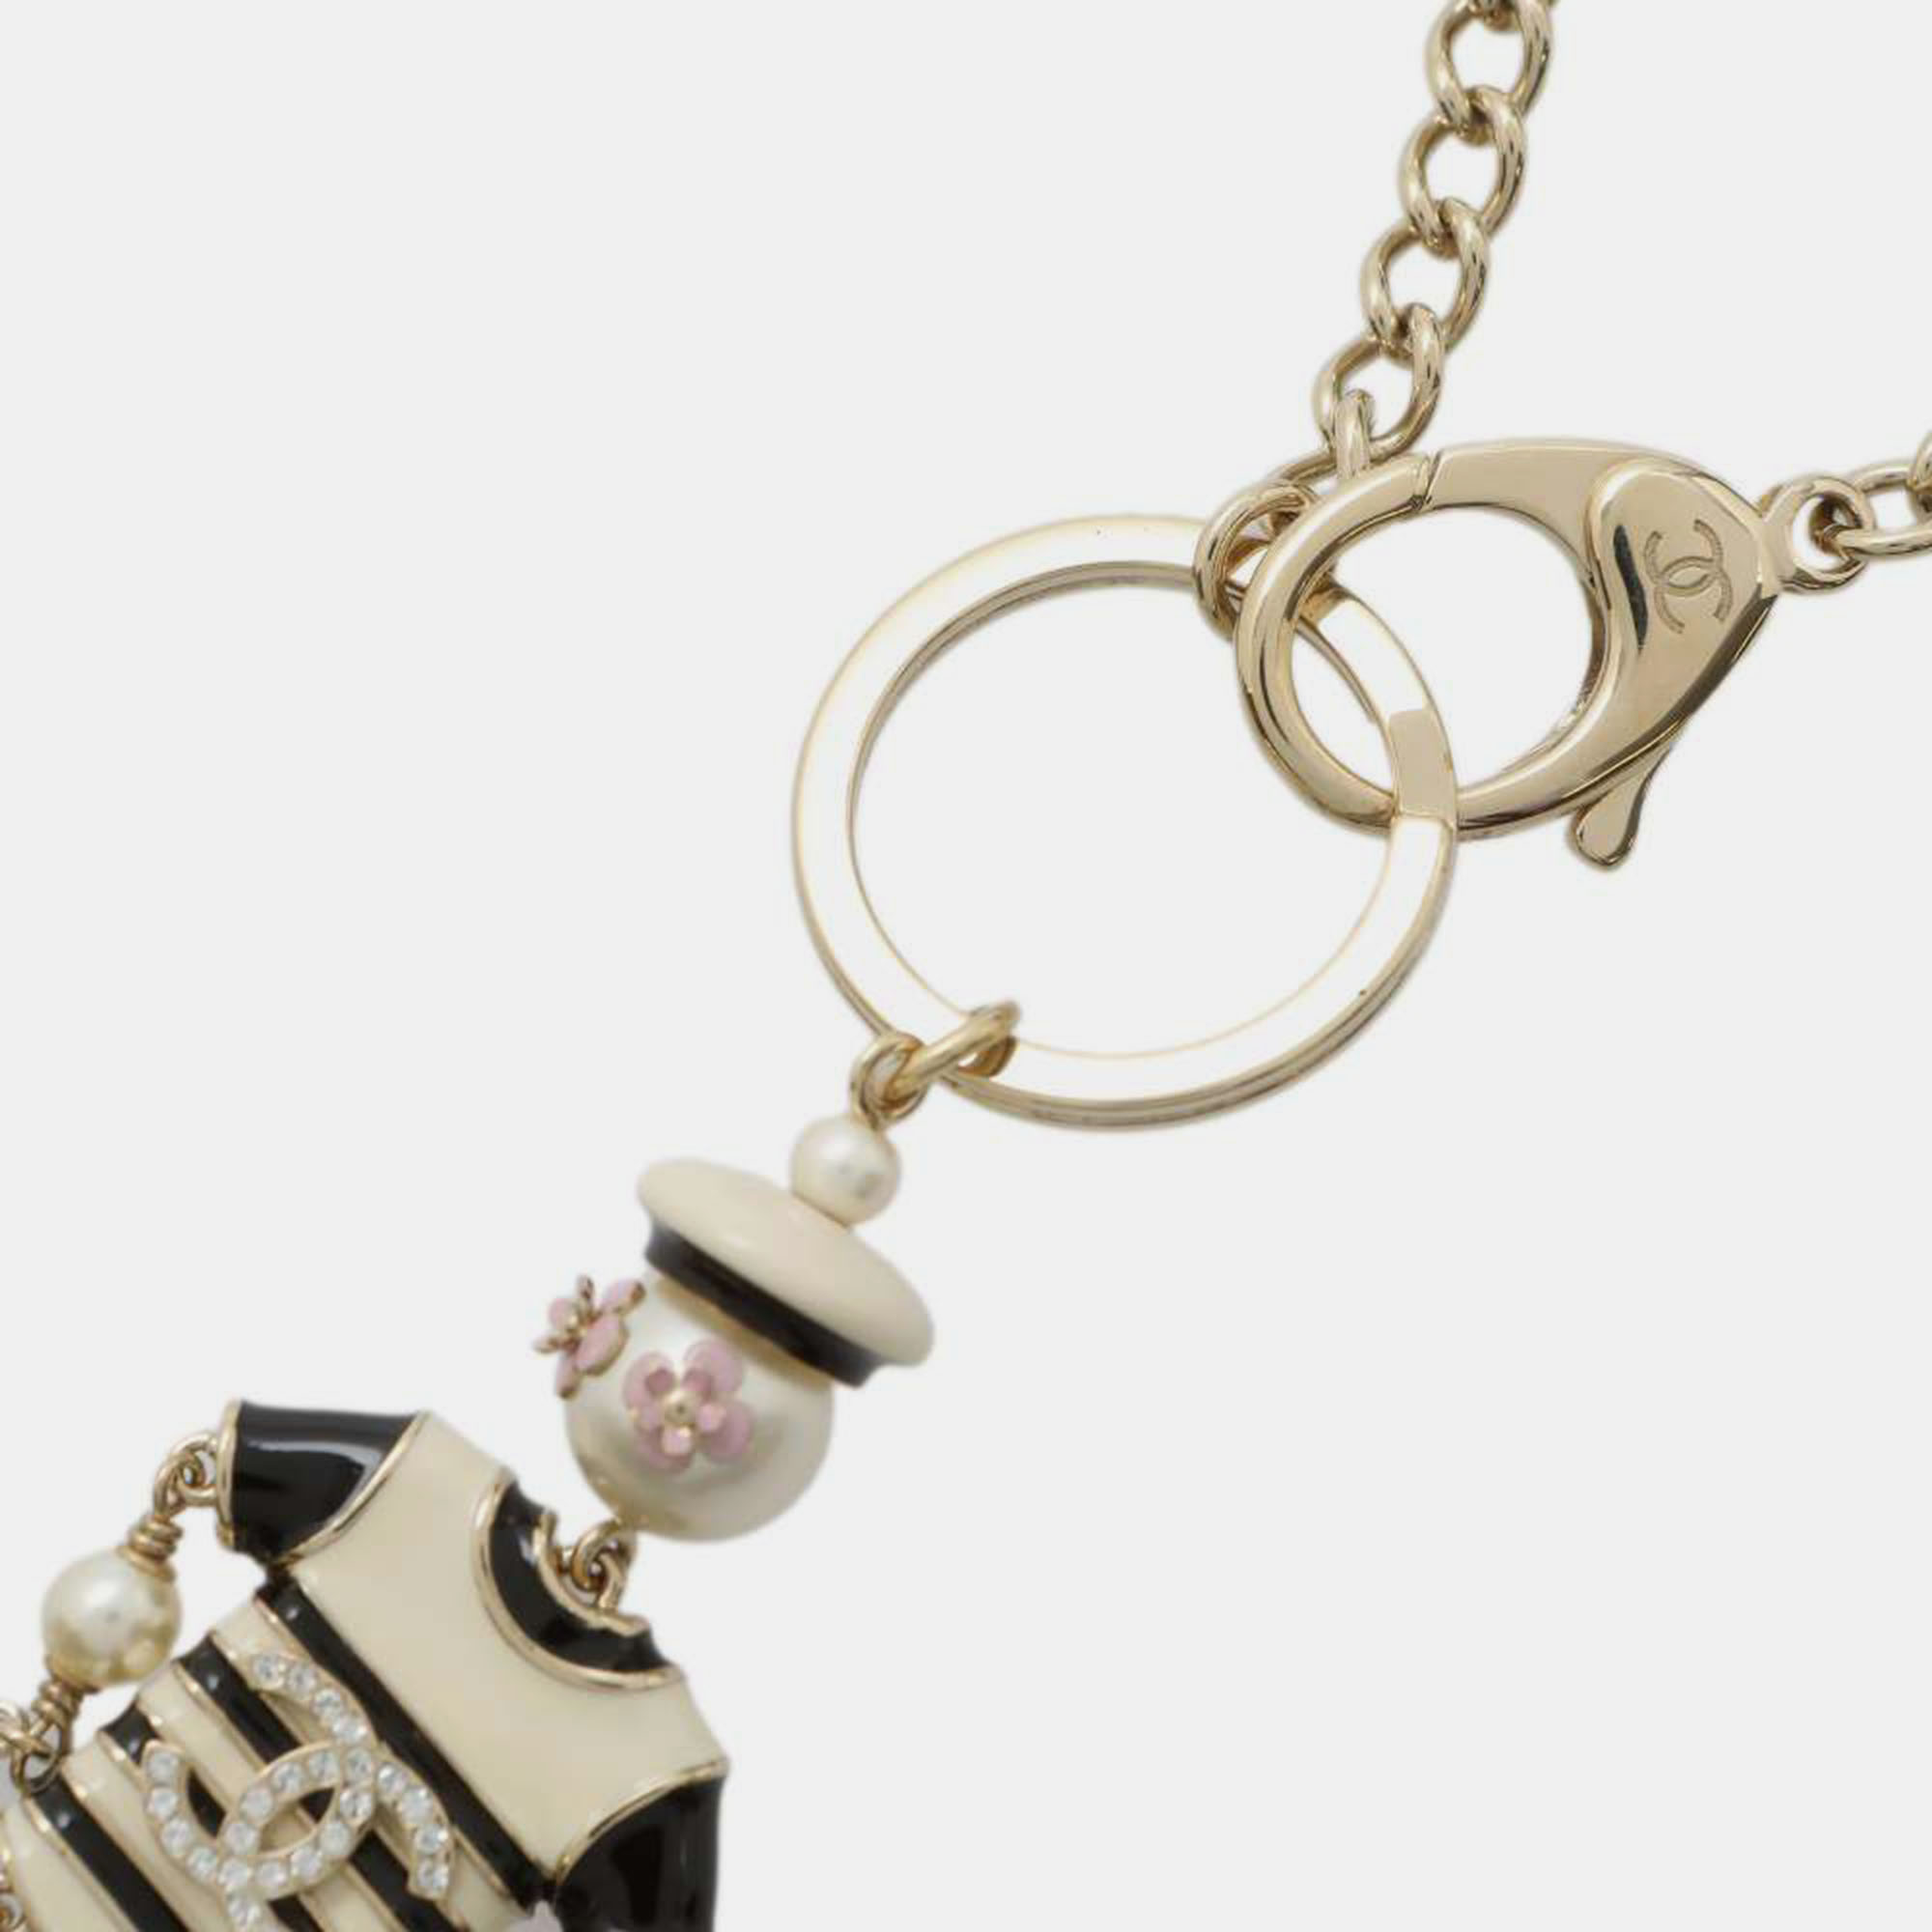 CHANEL DollBag Charm Necklace Gold/Black/White A58714 Faux Pearl  Rhinestone Metal